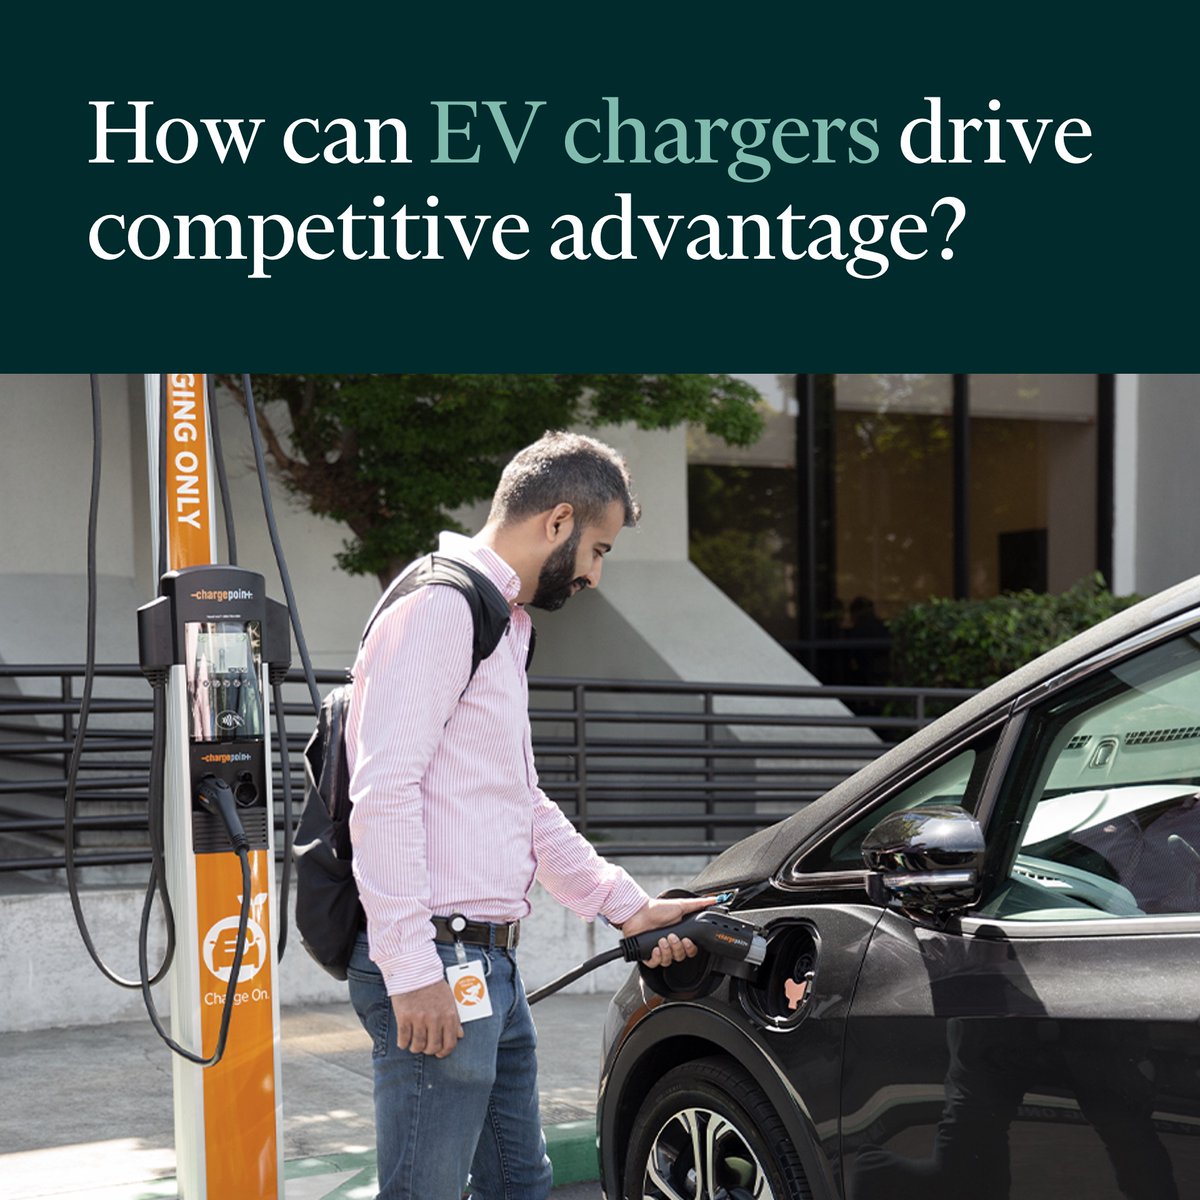 With #EV adoption on the rise, installing charging stations at the workplace can help companies entice employees #BacktoOffice and aid property owners in attracting and retaining tenants. Our latest article with @ChargePointnet explores how: cbre.co/4a8hOQI